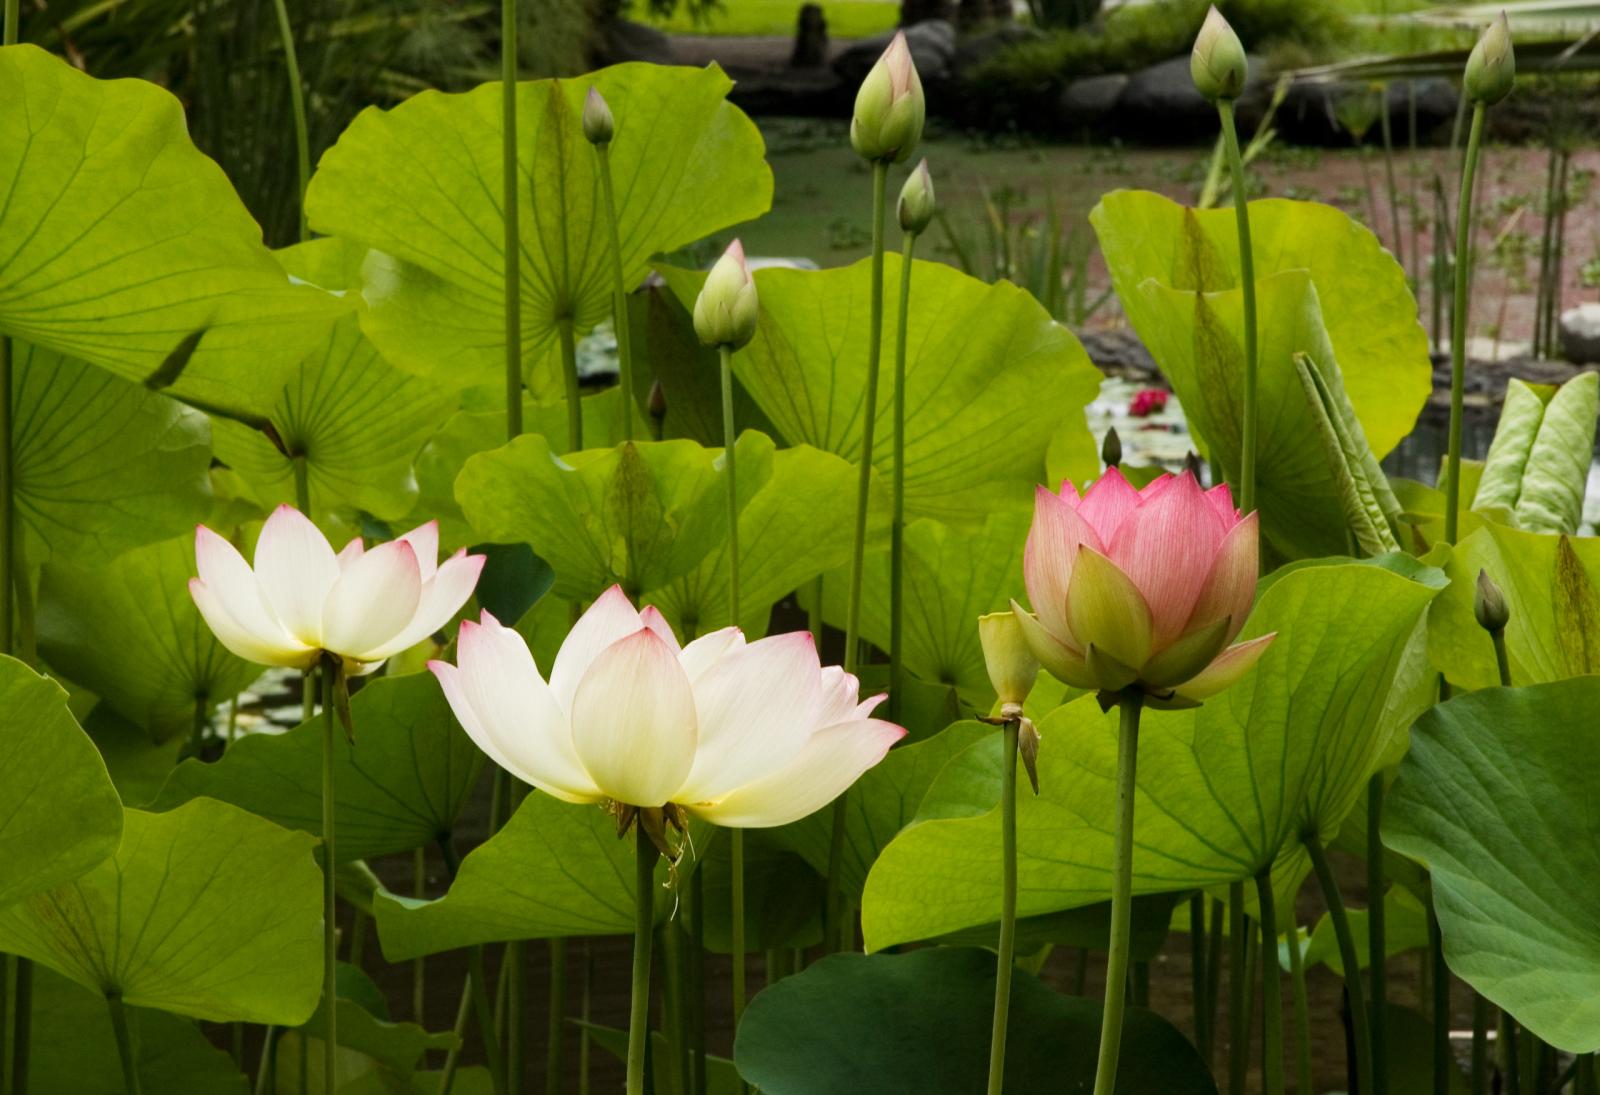 Multiple pink flowers and circular green leaves emerging from the water